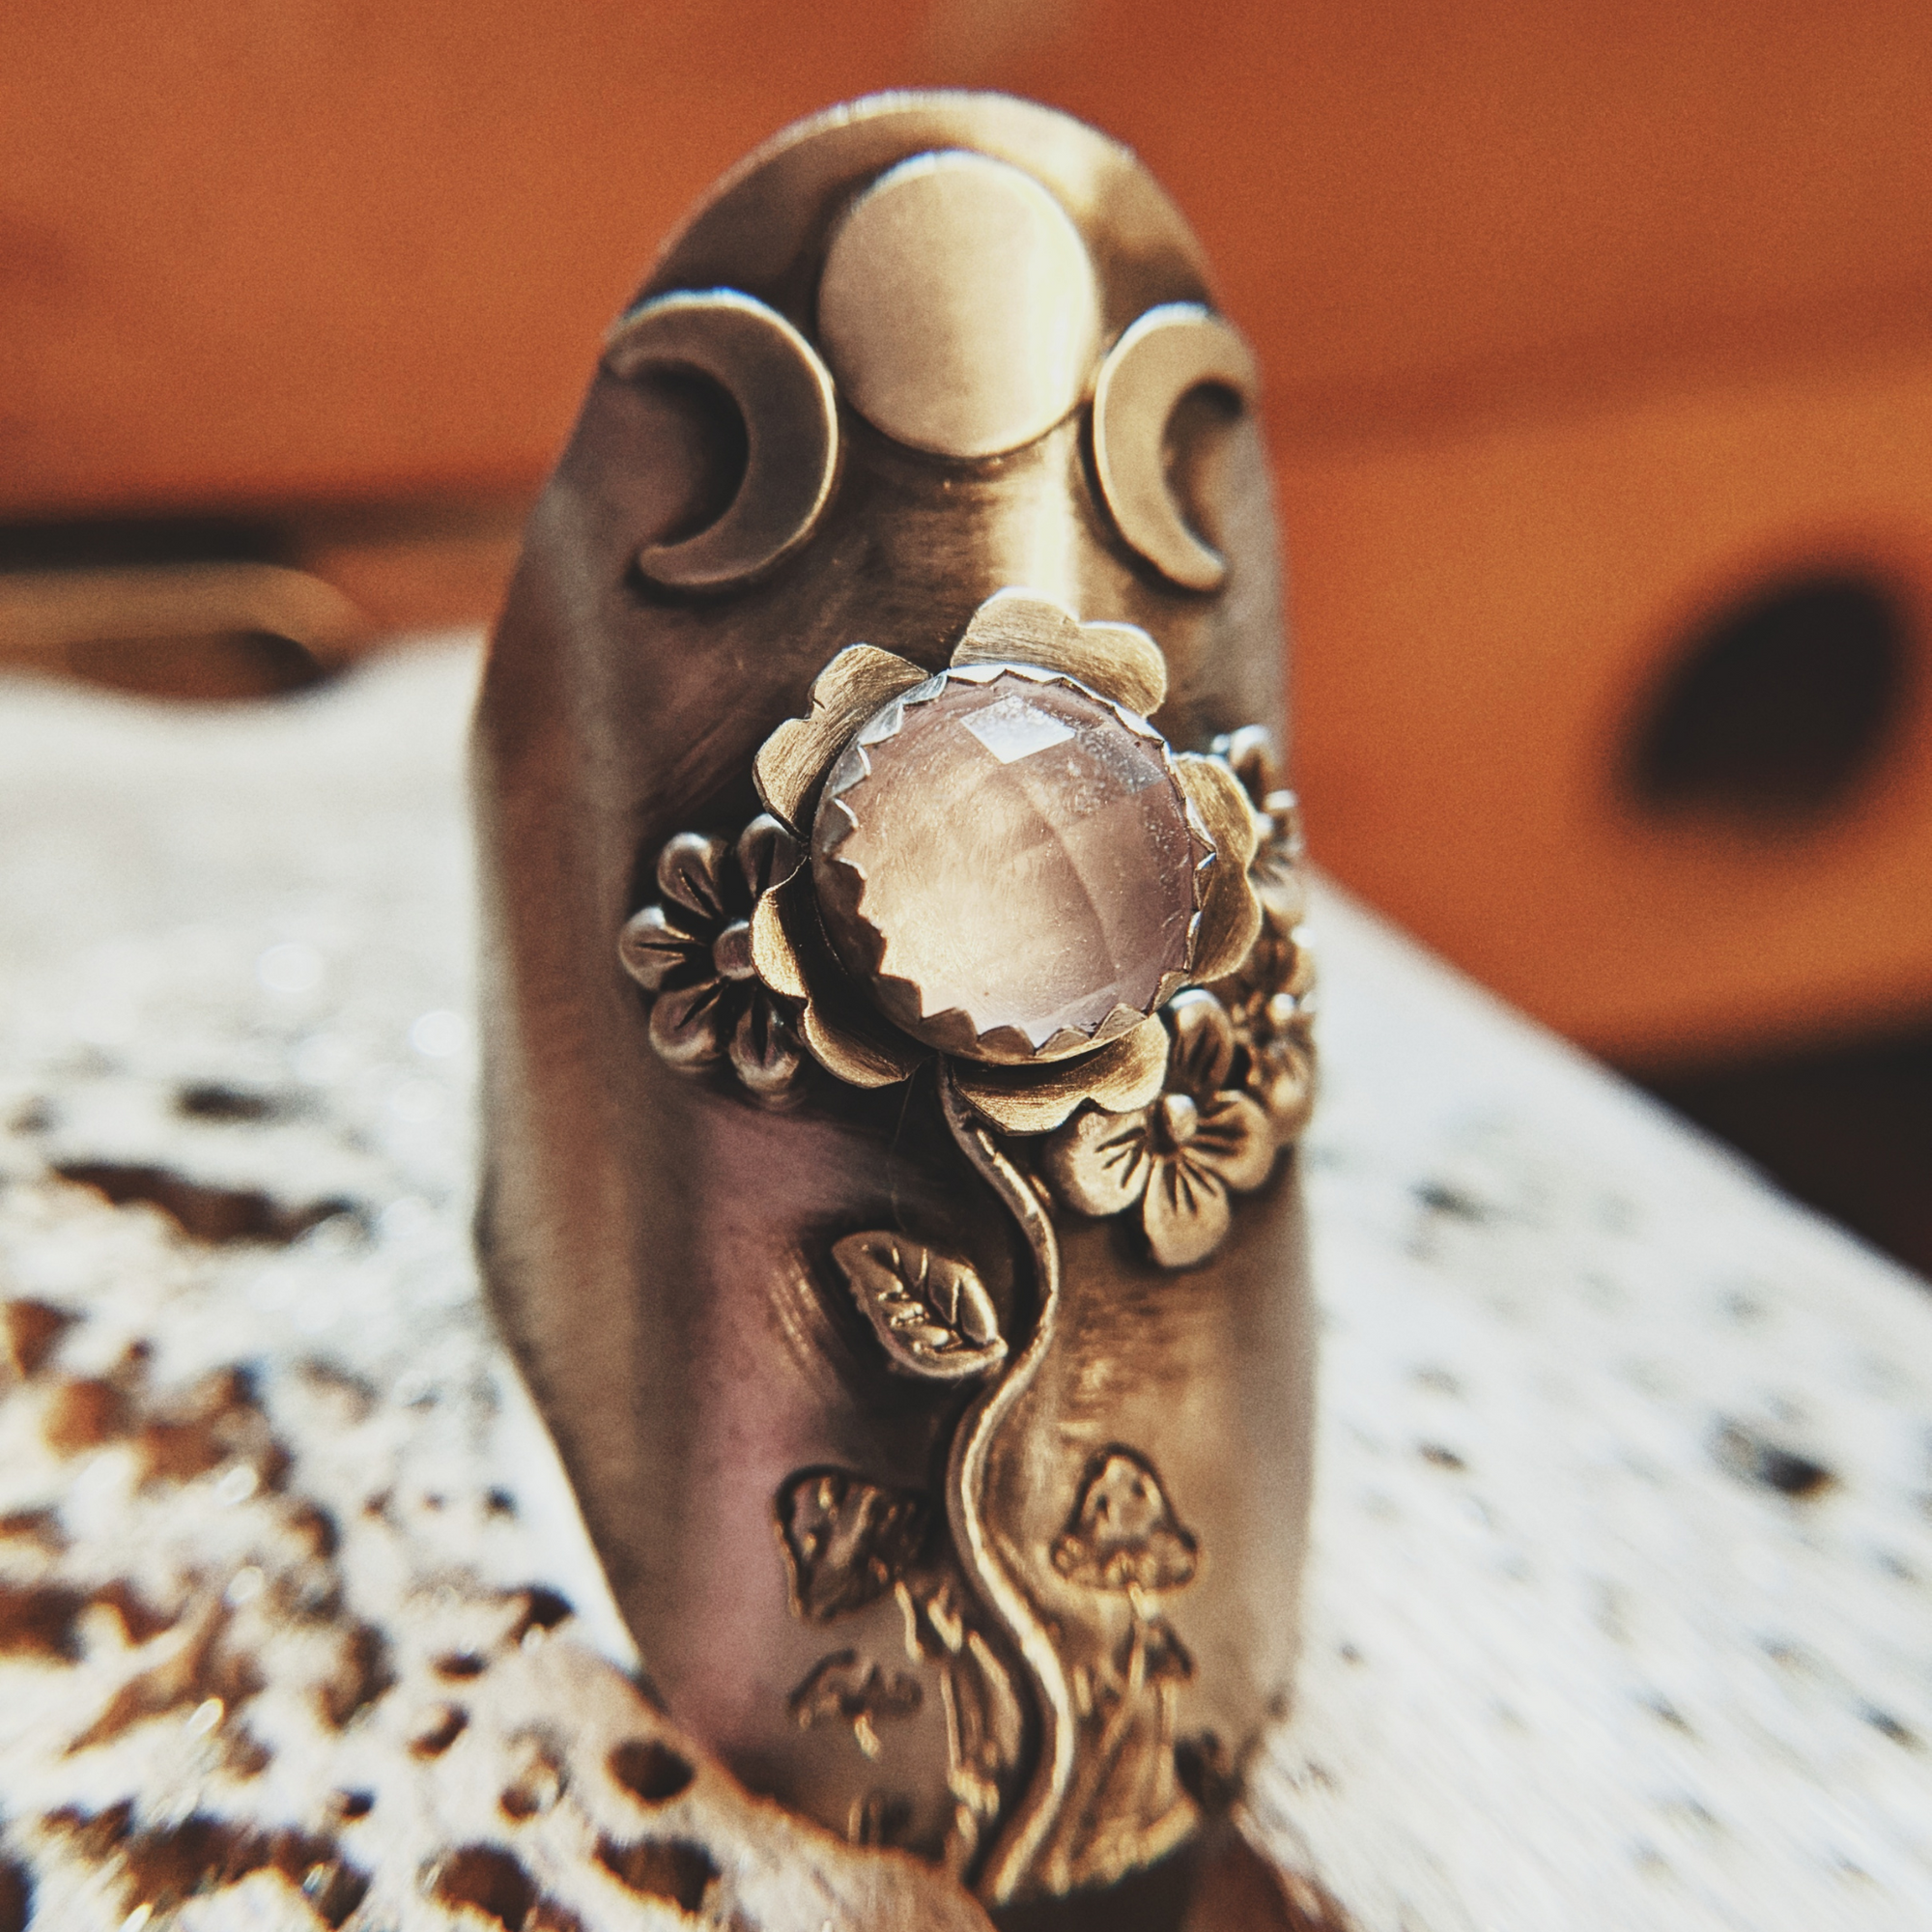 Triple Moon Goddess symbol on a ring with rose quartz stone and flowers and mushrooms